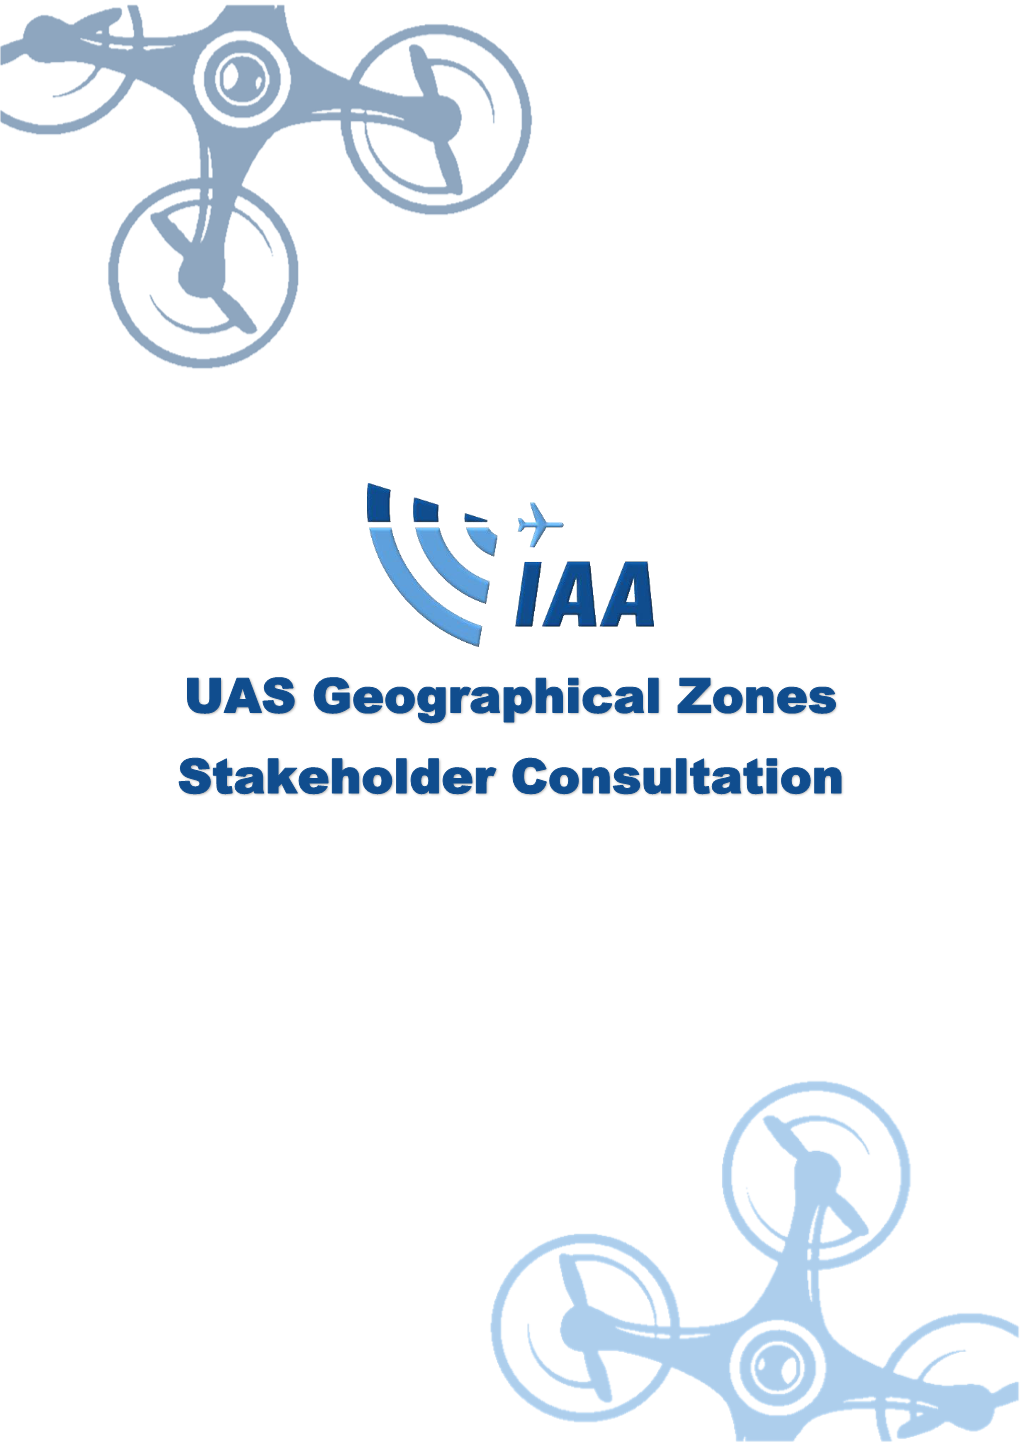 UAS Geographical Zones Stakeholder Consultation